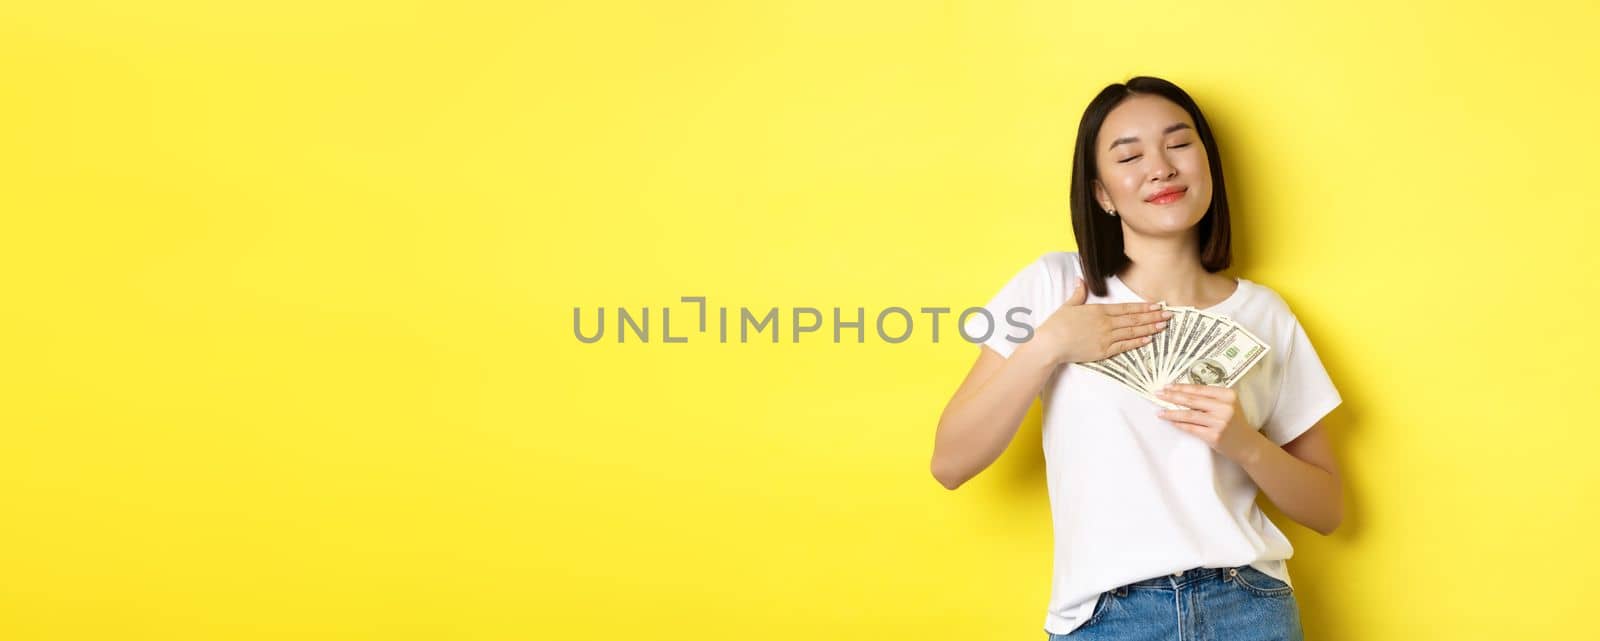 Beautiful asian woman love money, hugging dollars and smiling pleased, standing over yellow background.